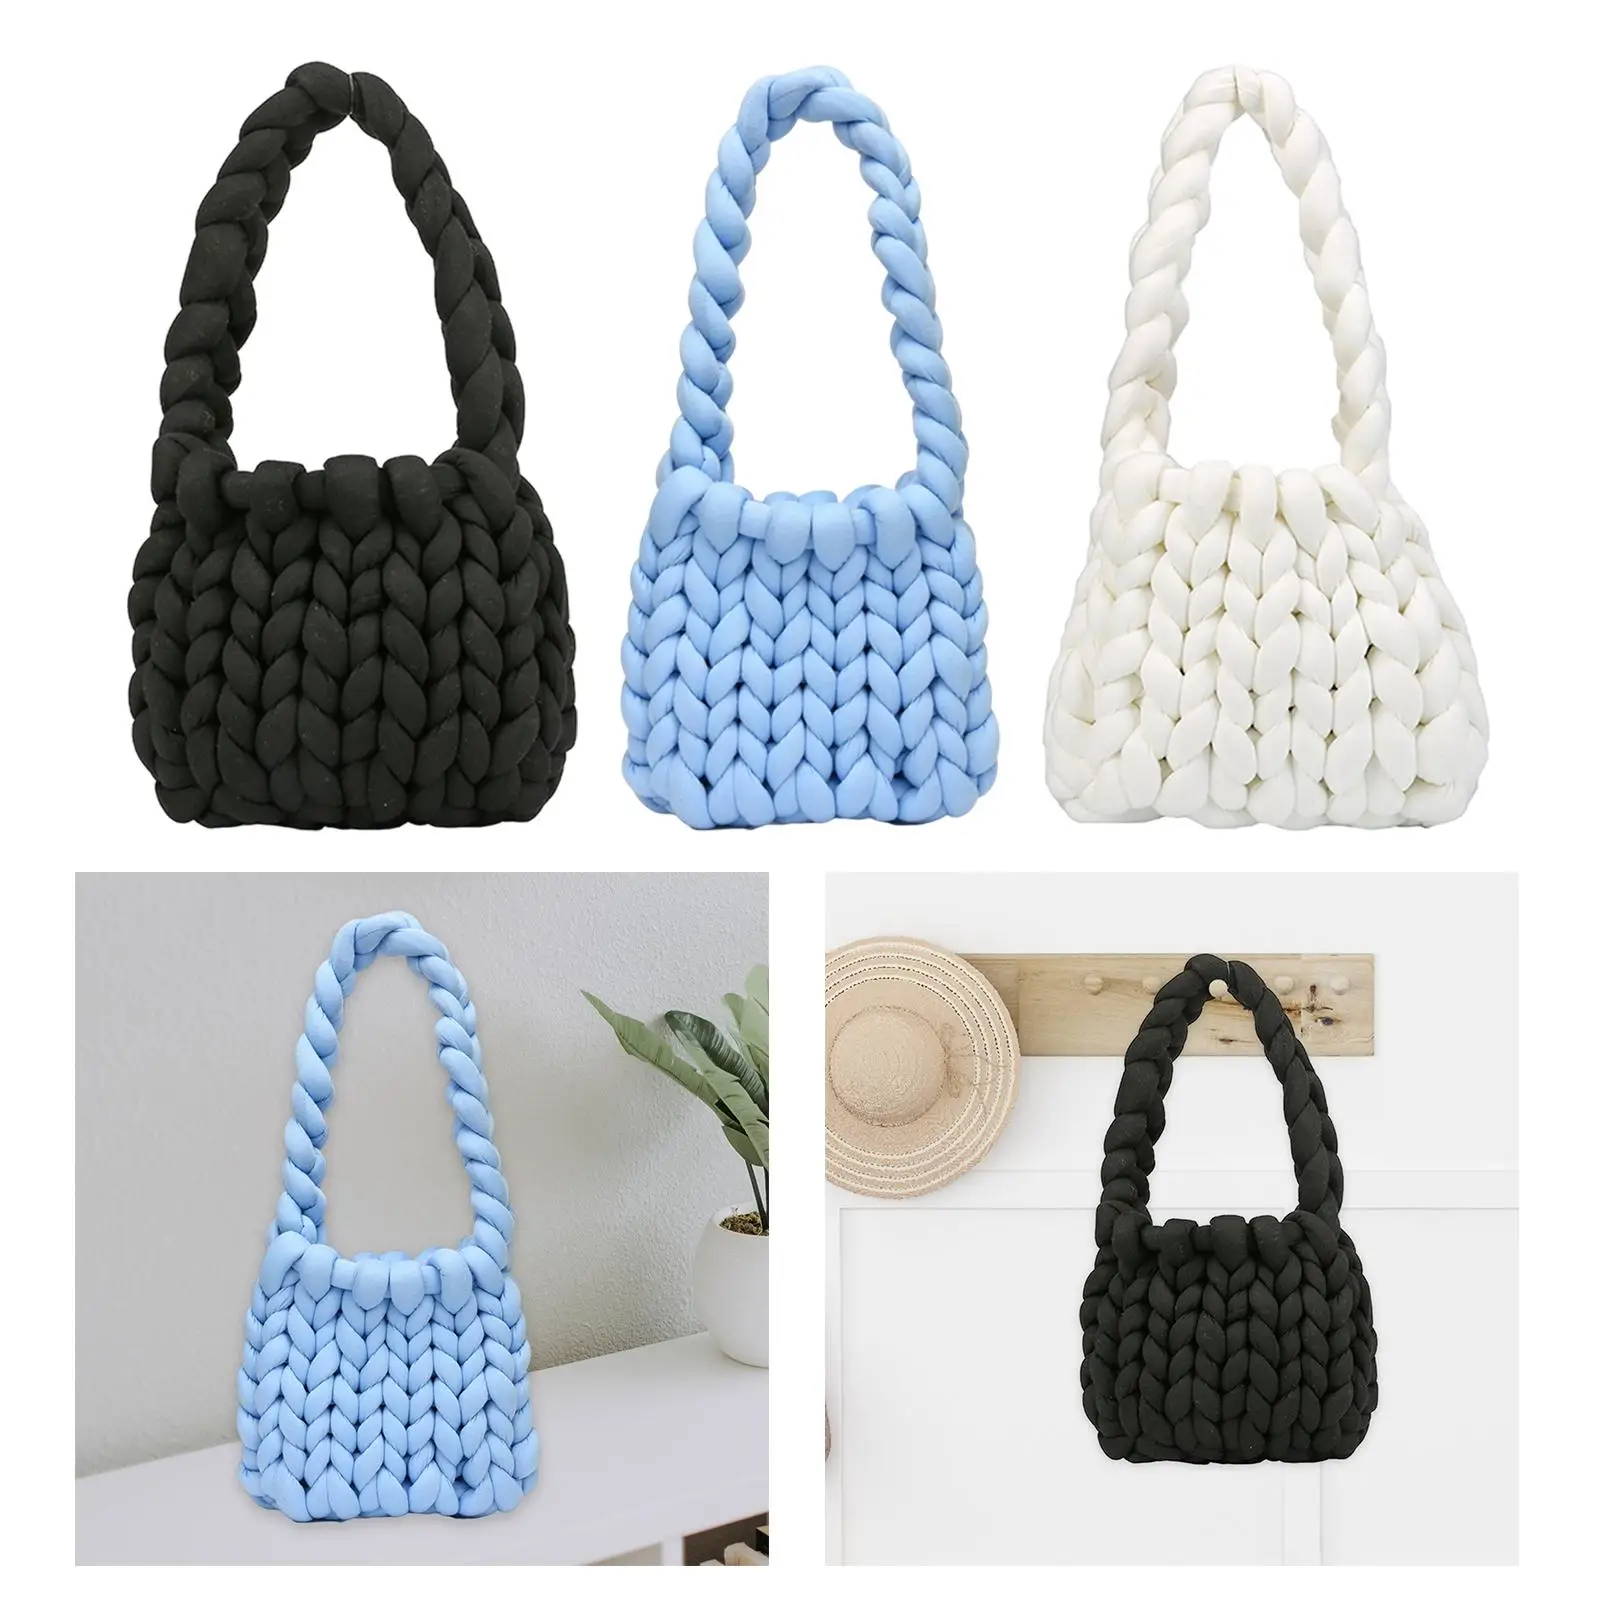 Thick Yarn Comfortable Durable Knitting for DIY Tote Making Home Decorations